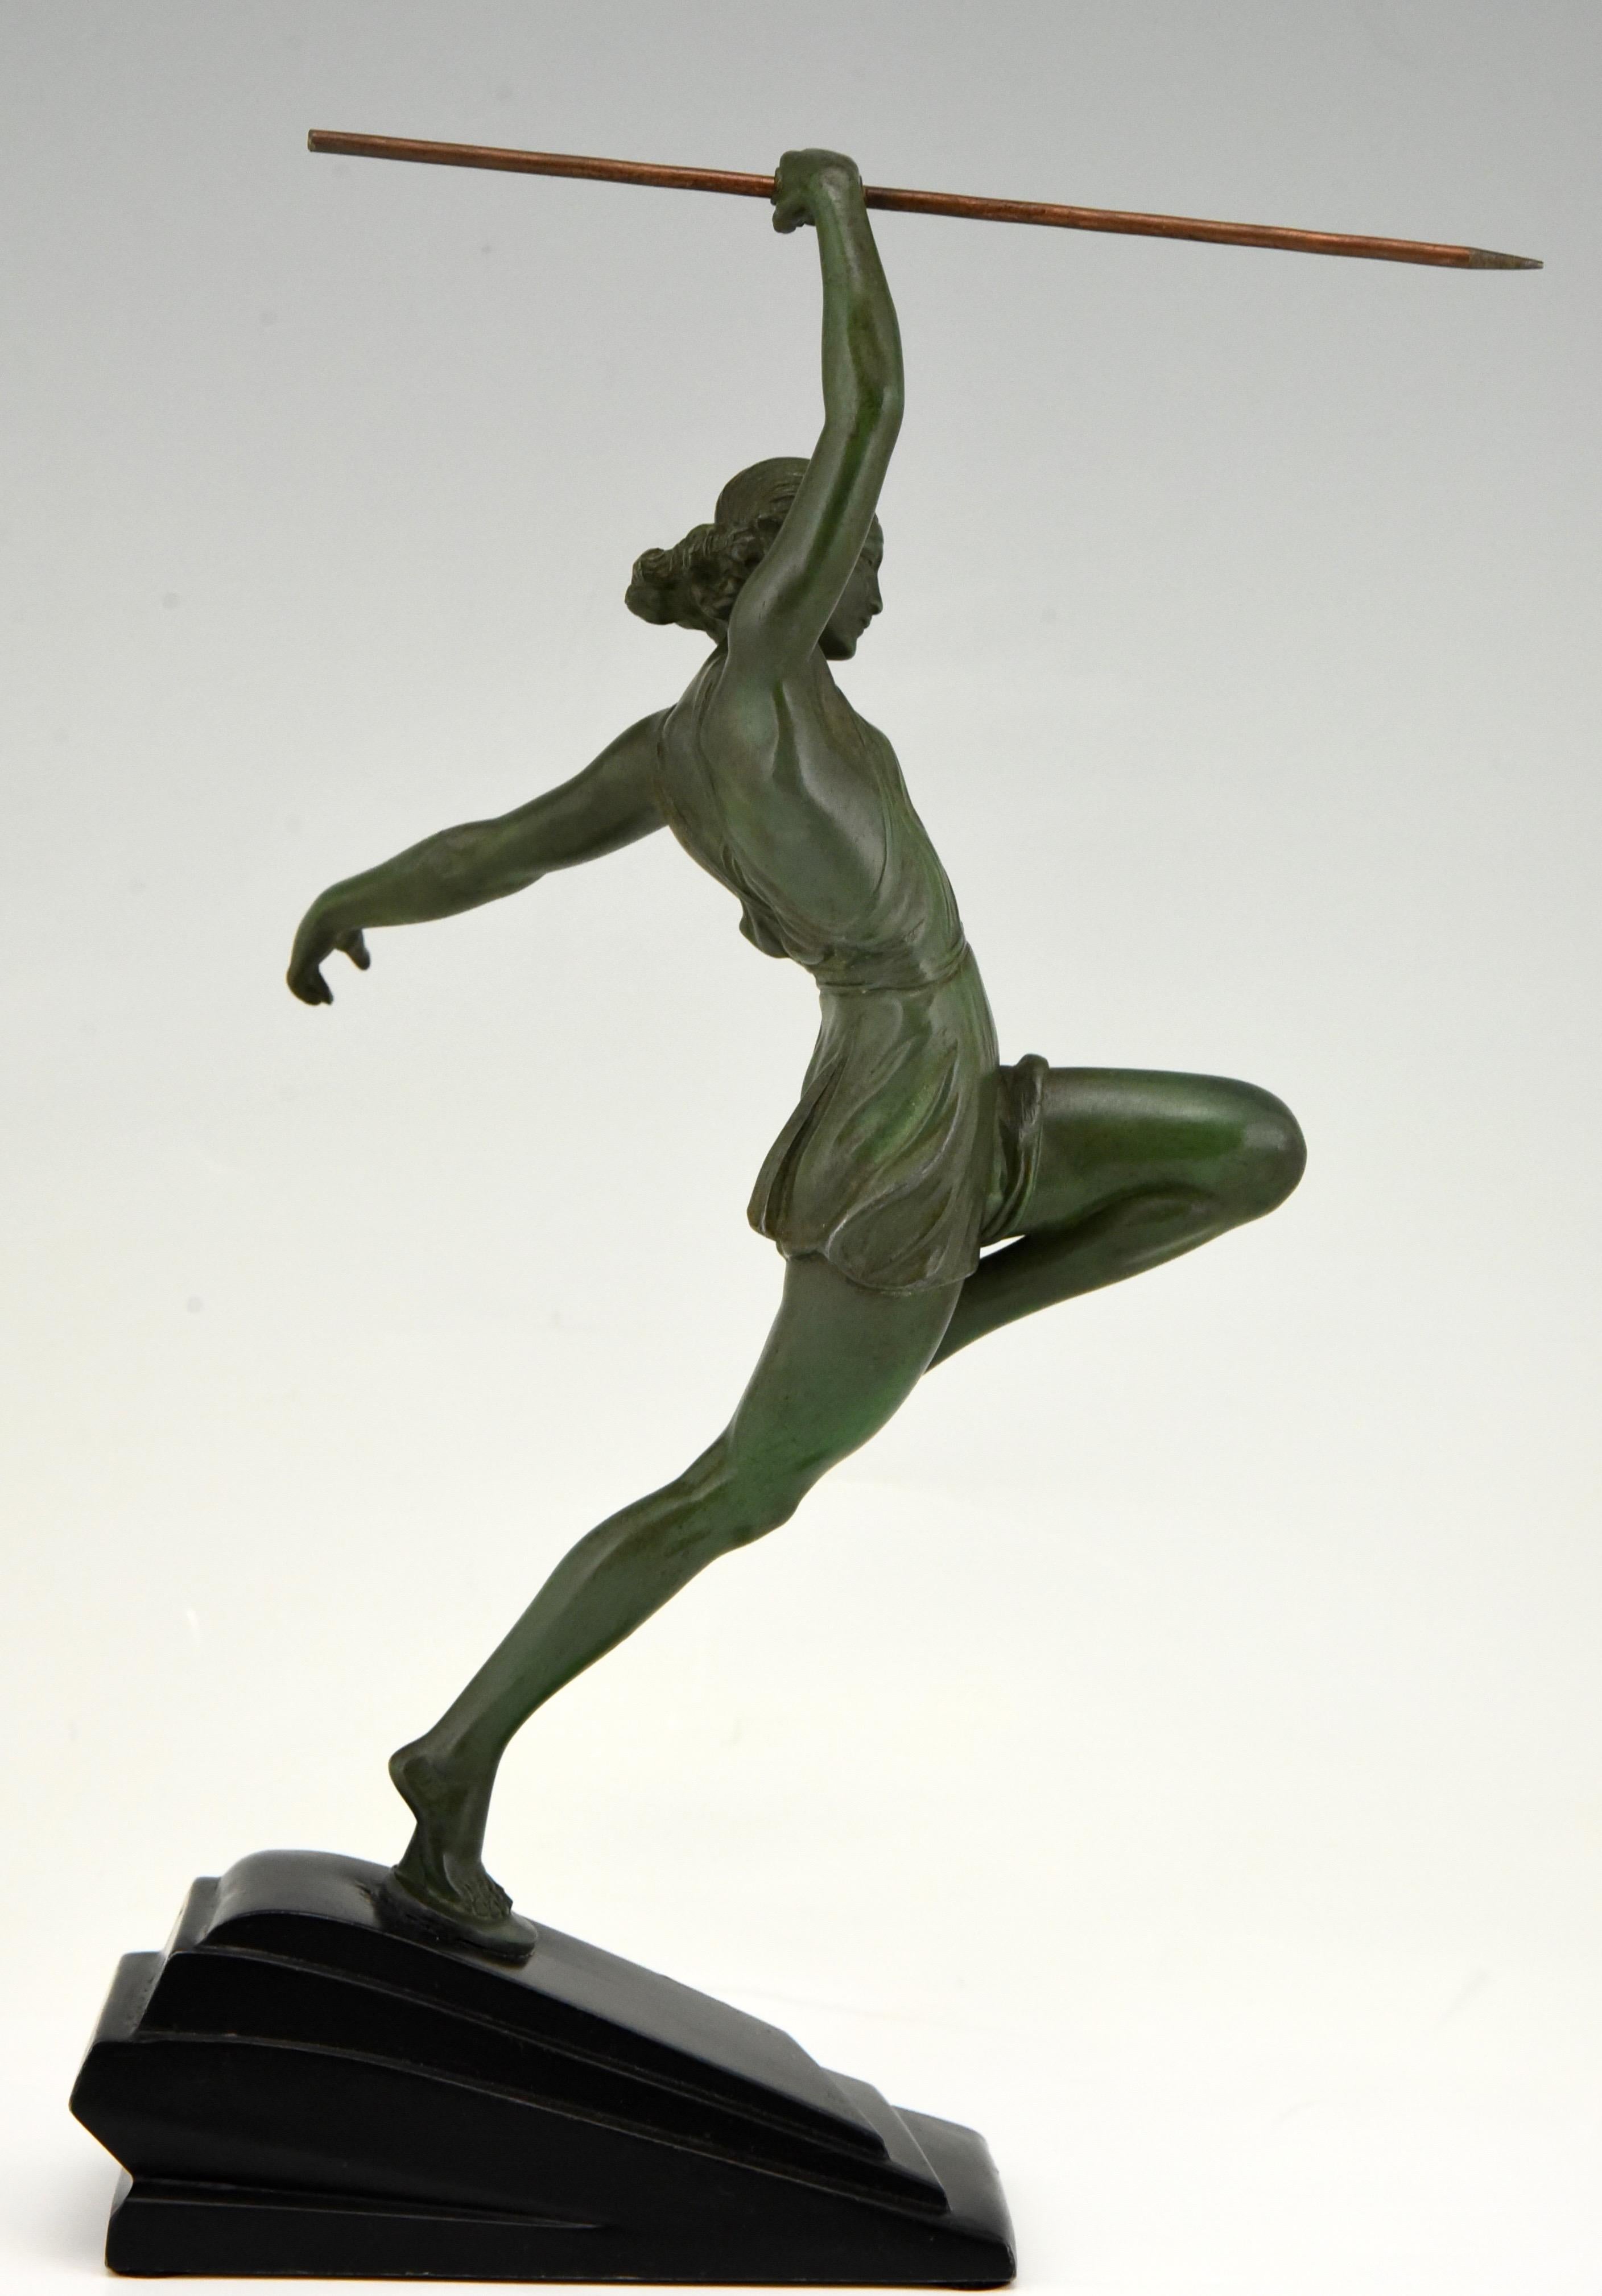 Mid-20th Century Art Deco Sculpture Javelin Thrower Fayral, Pierre Le Faguays for Le Verrier 1930